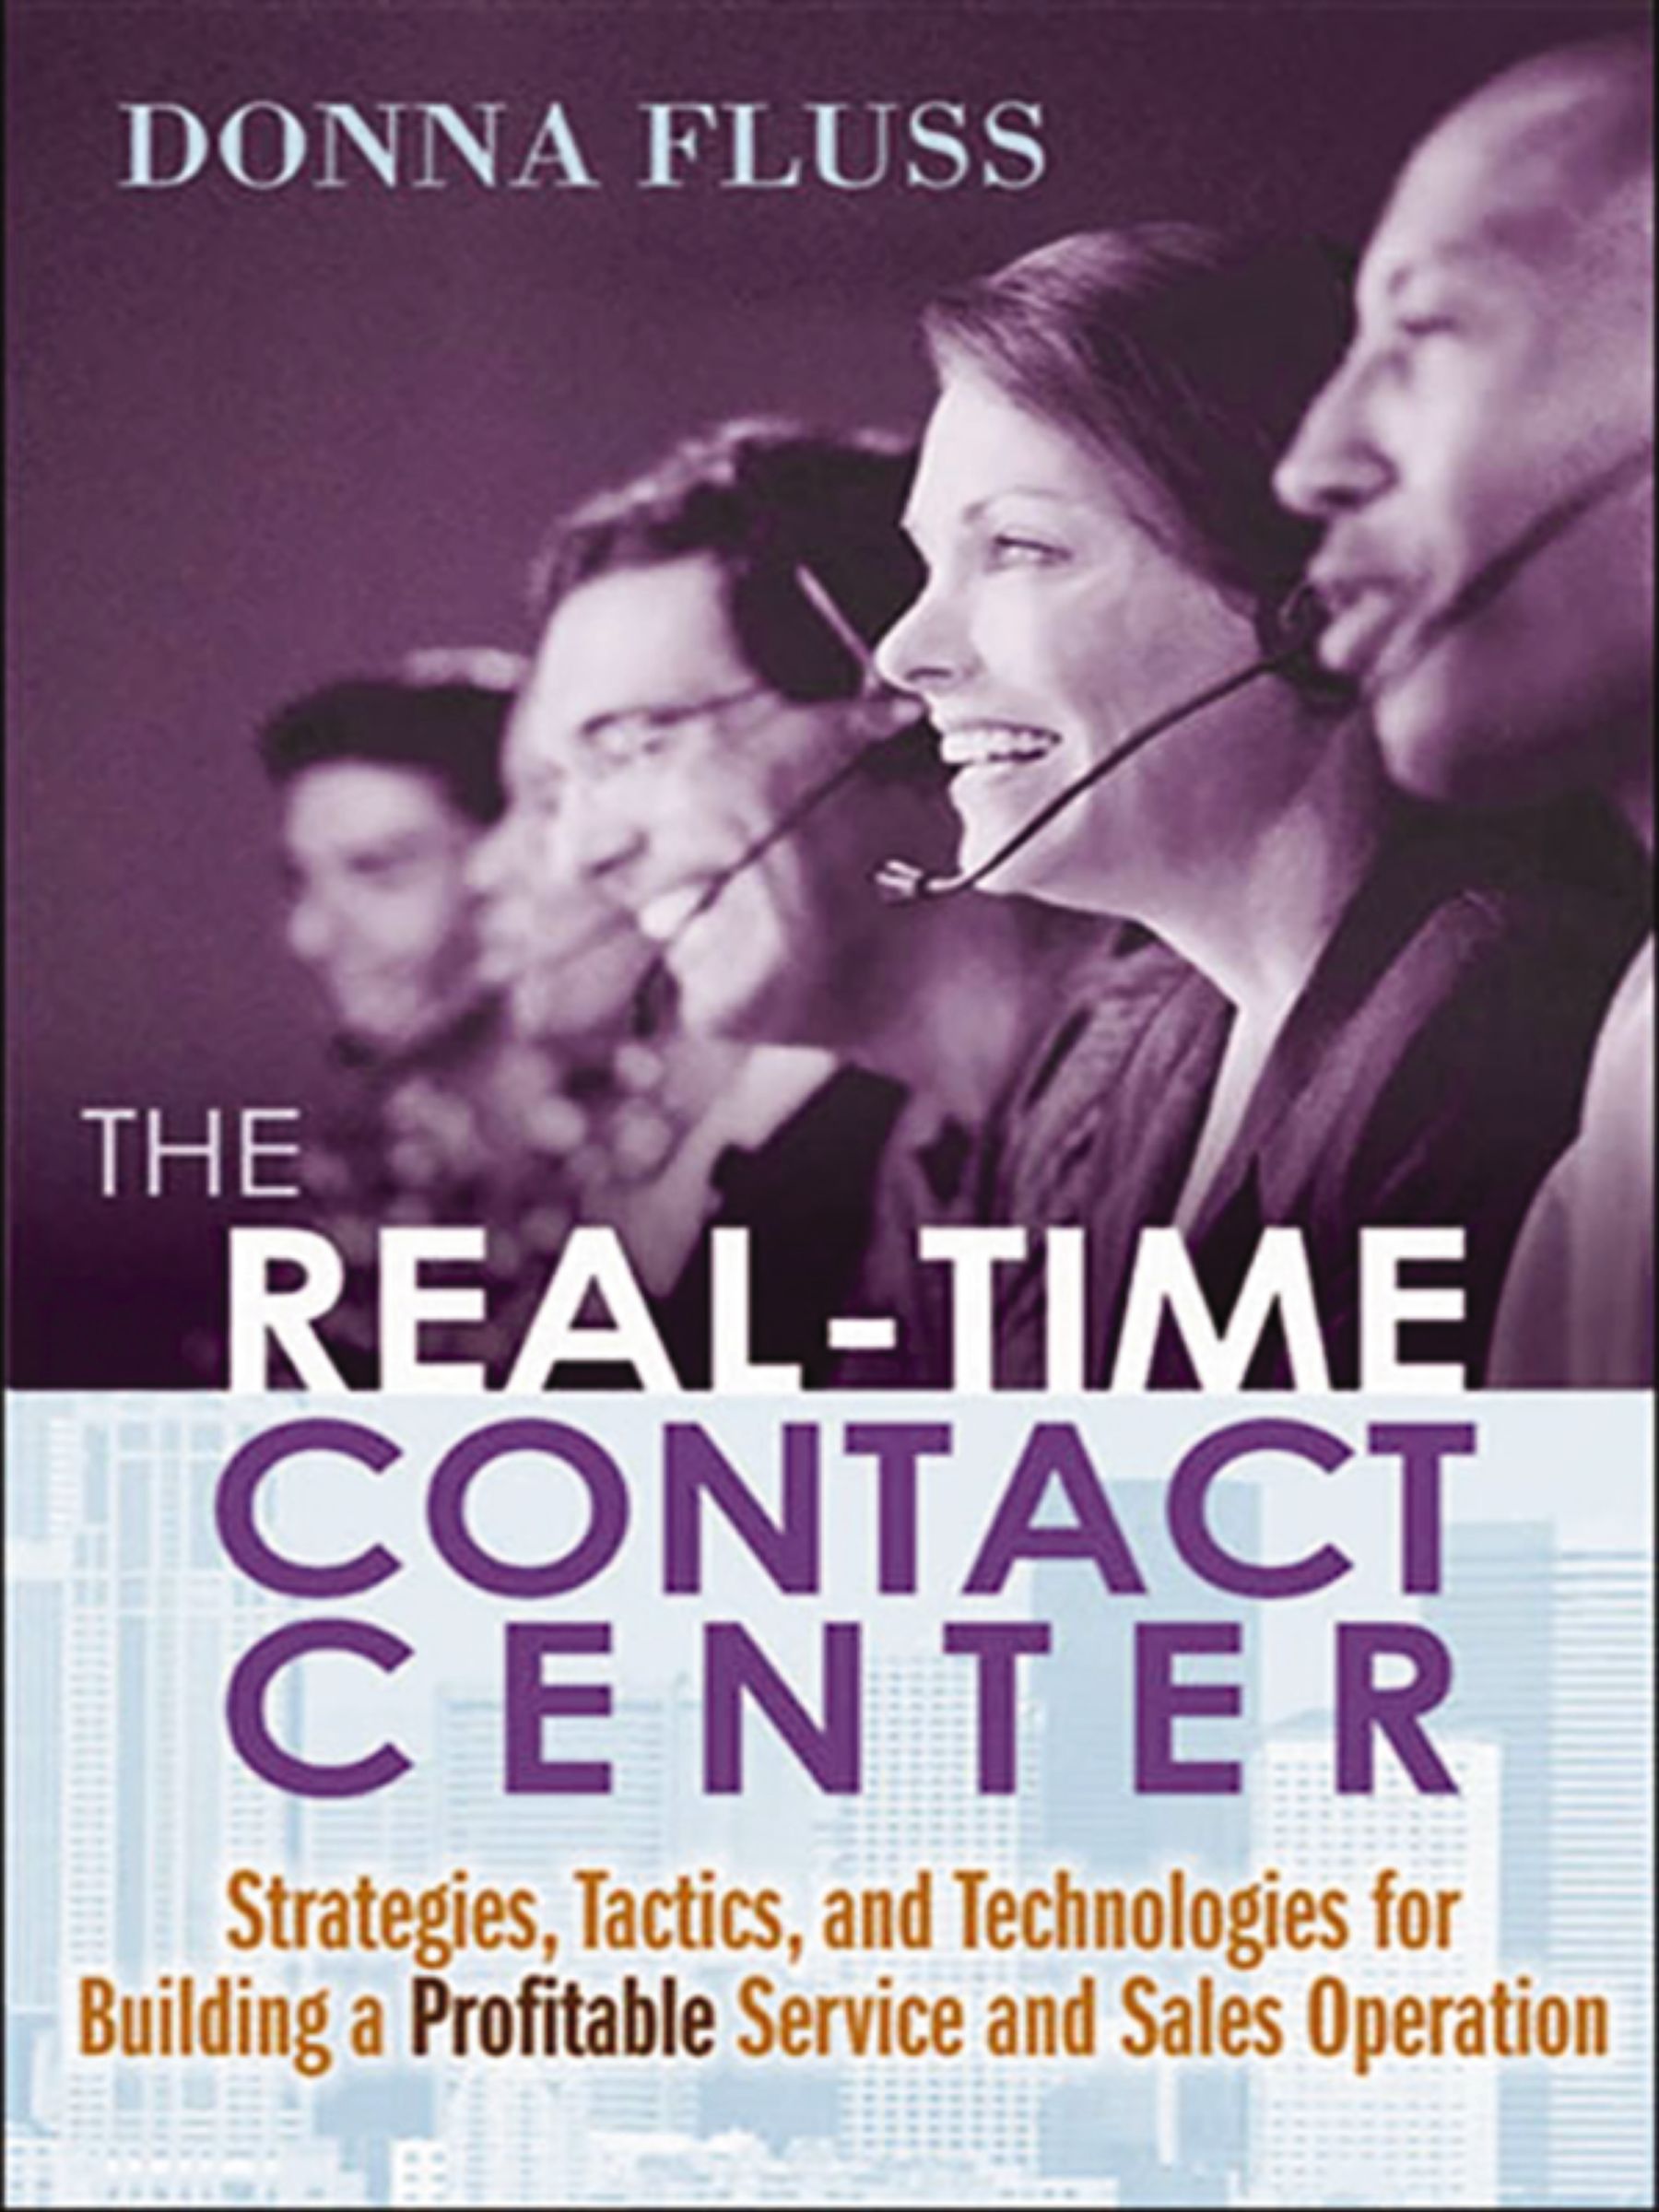 The Real-Time Contact Center